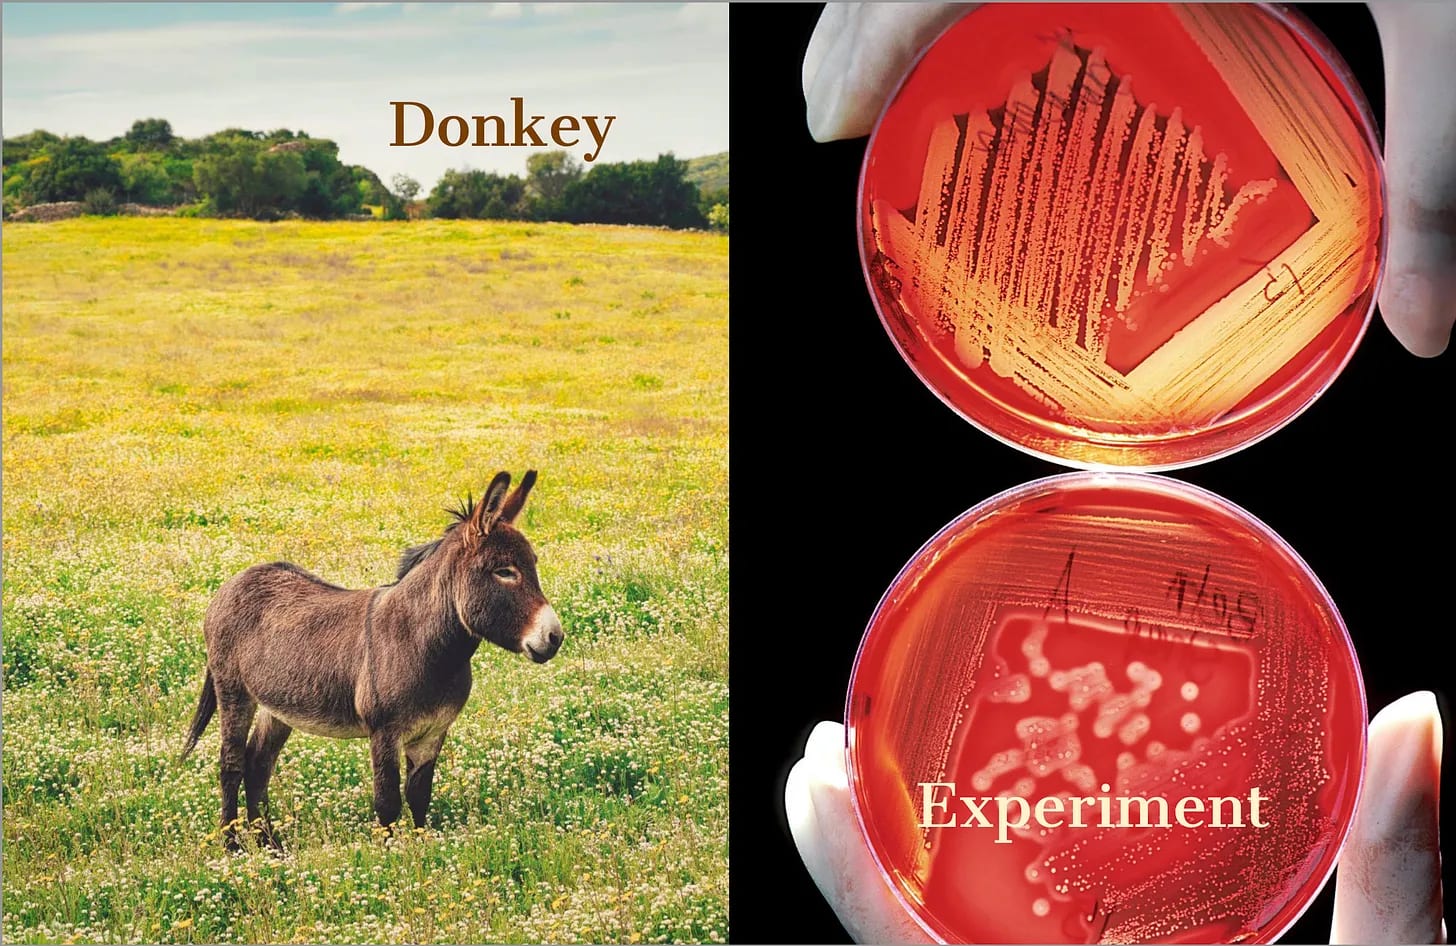 Donkey and experiment